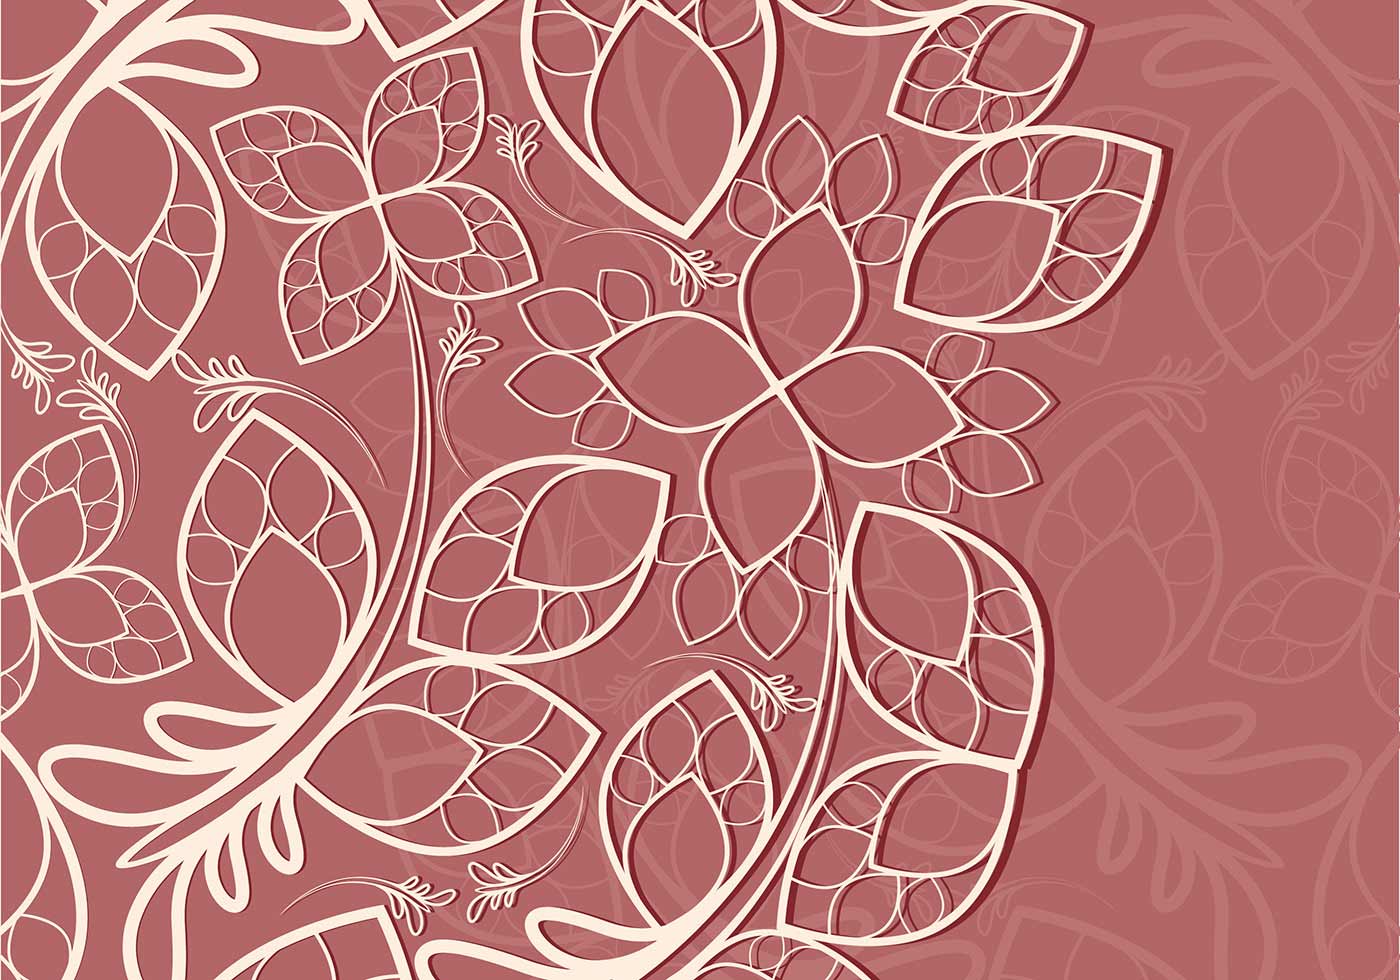 Pink Floral Lace Texture Vector - Download Free Vector Art, Stock